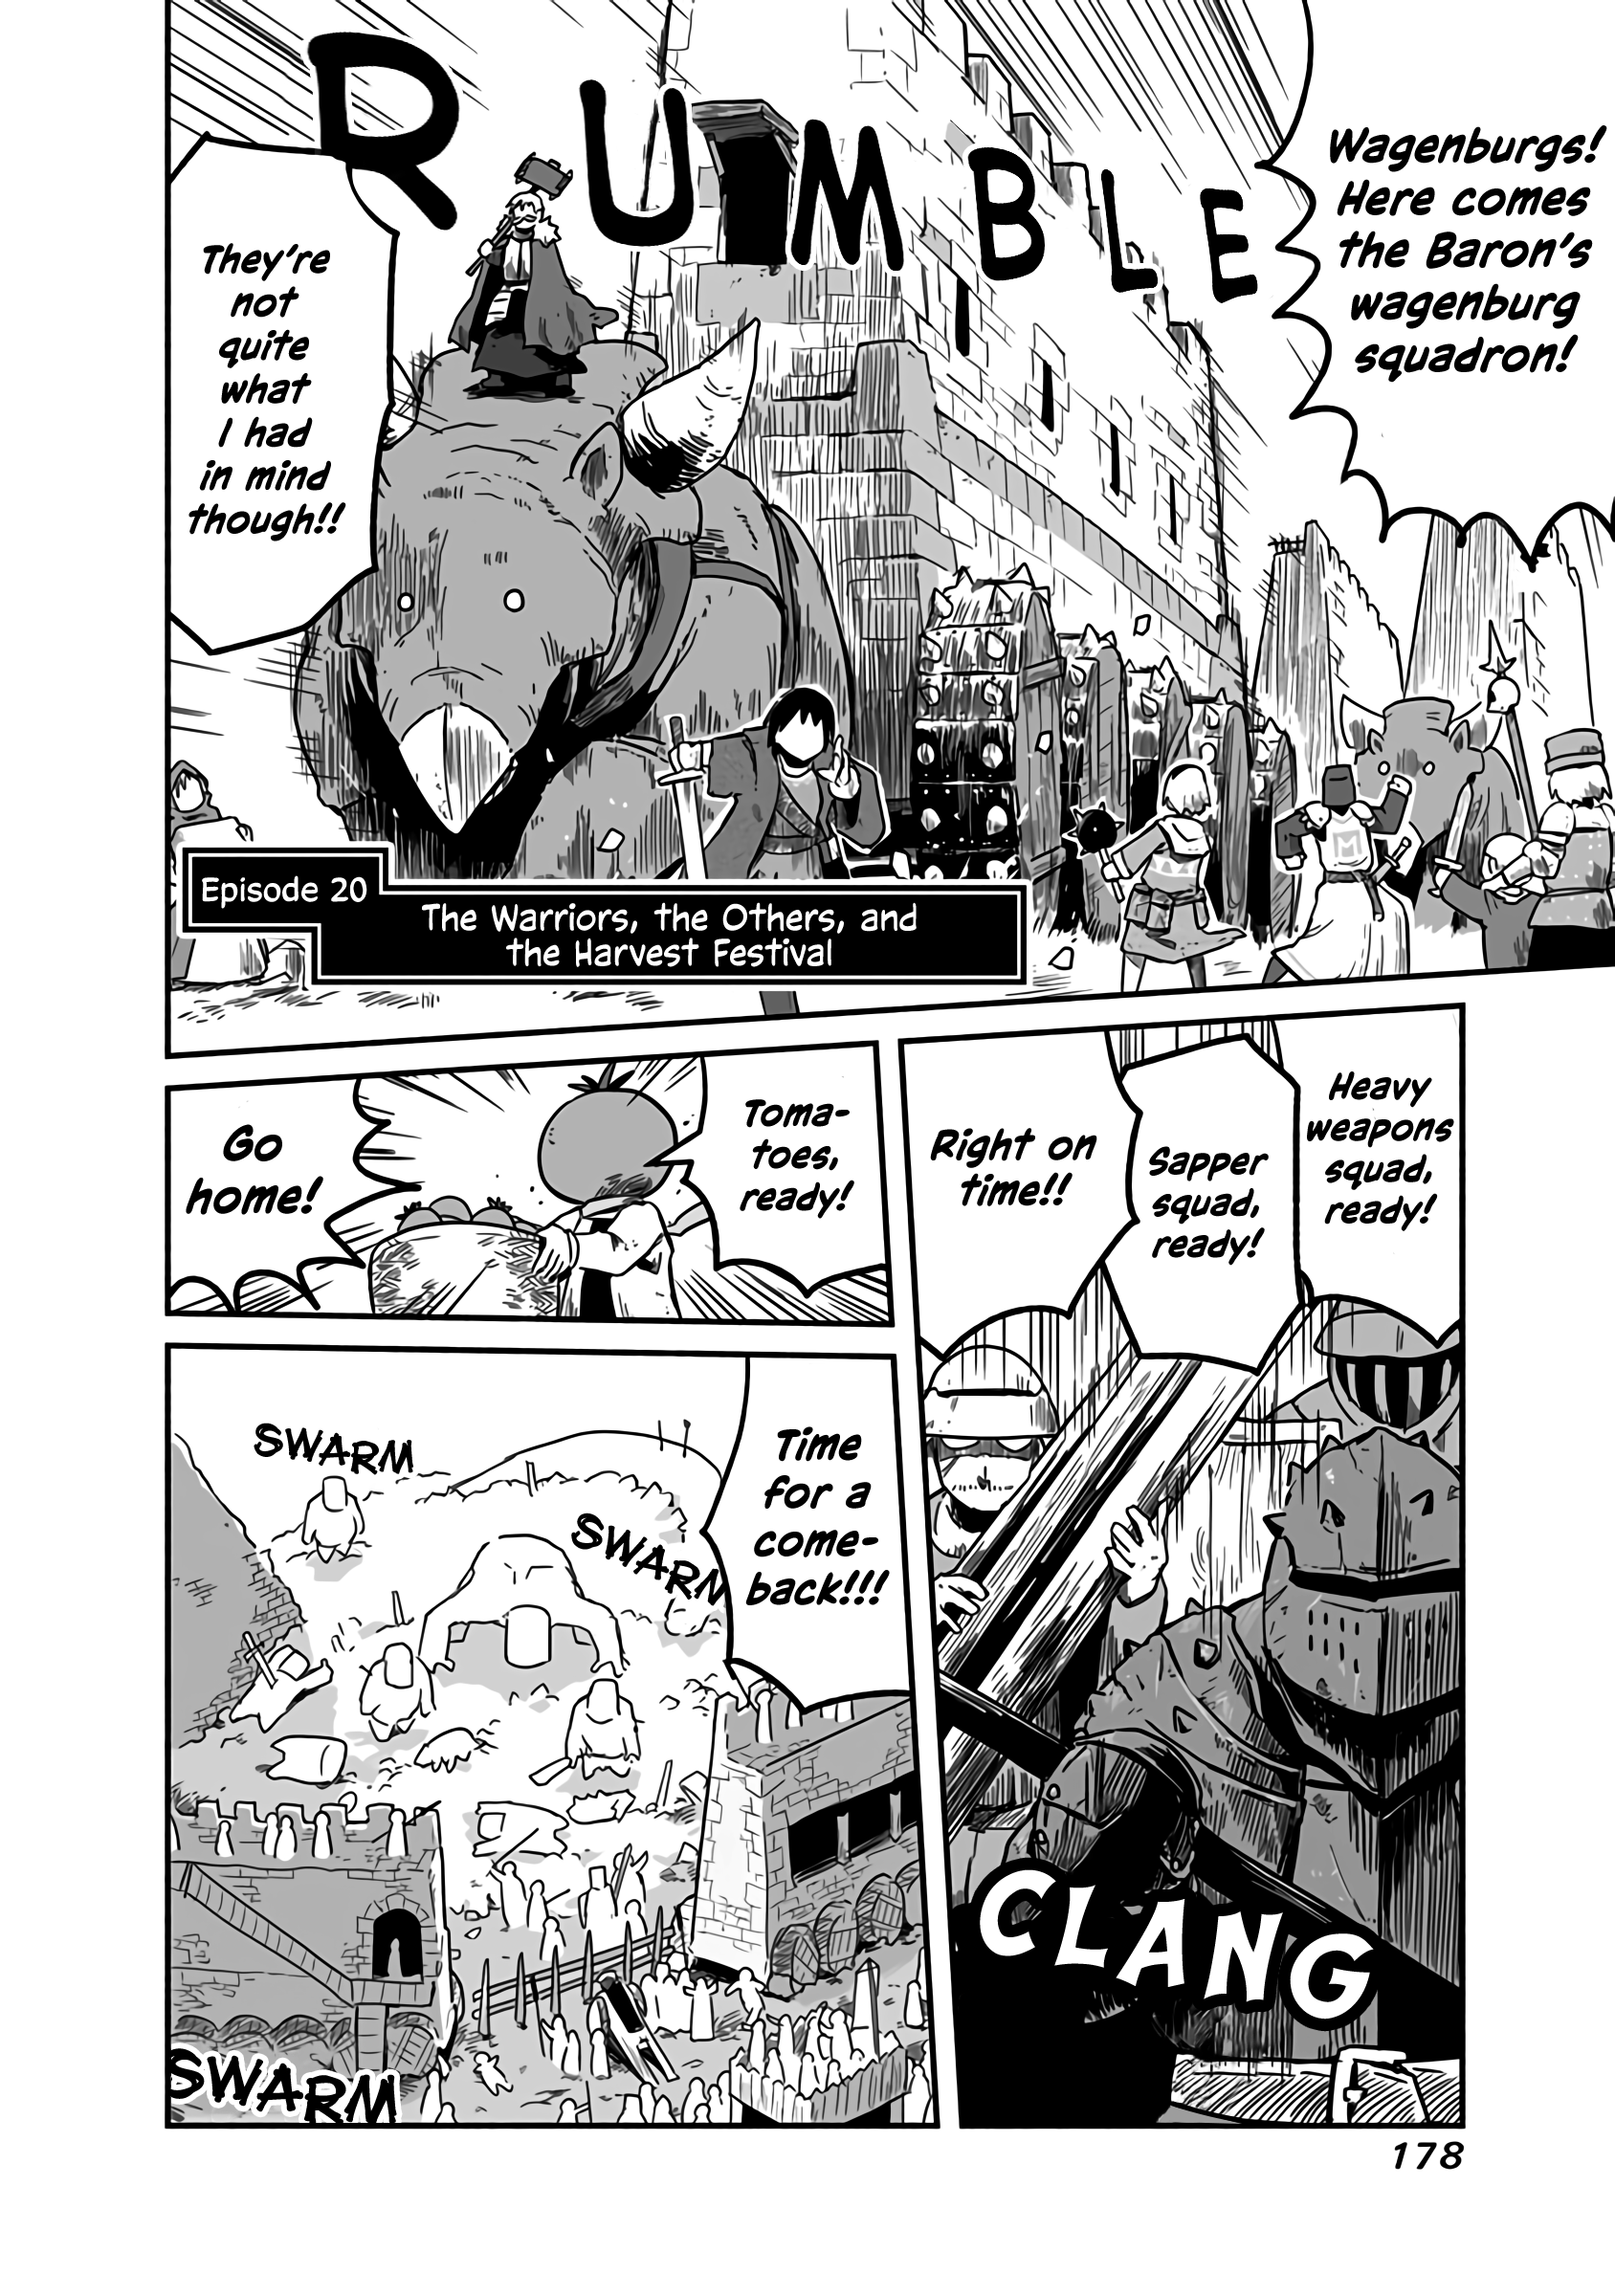 The Dragon, The Hero, And The Courier Vol.3 Chapter 20: The Warriors, The Others, And The Harvest Festival - Picture 3